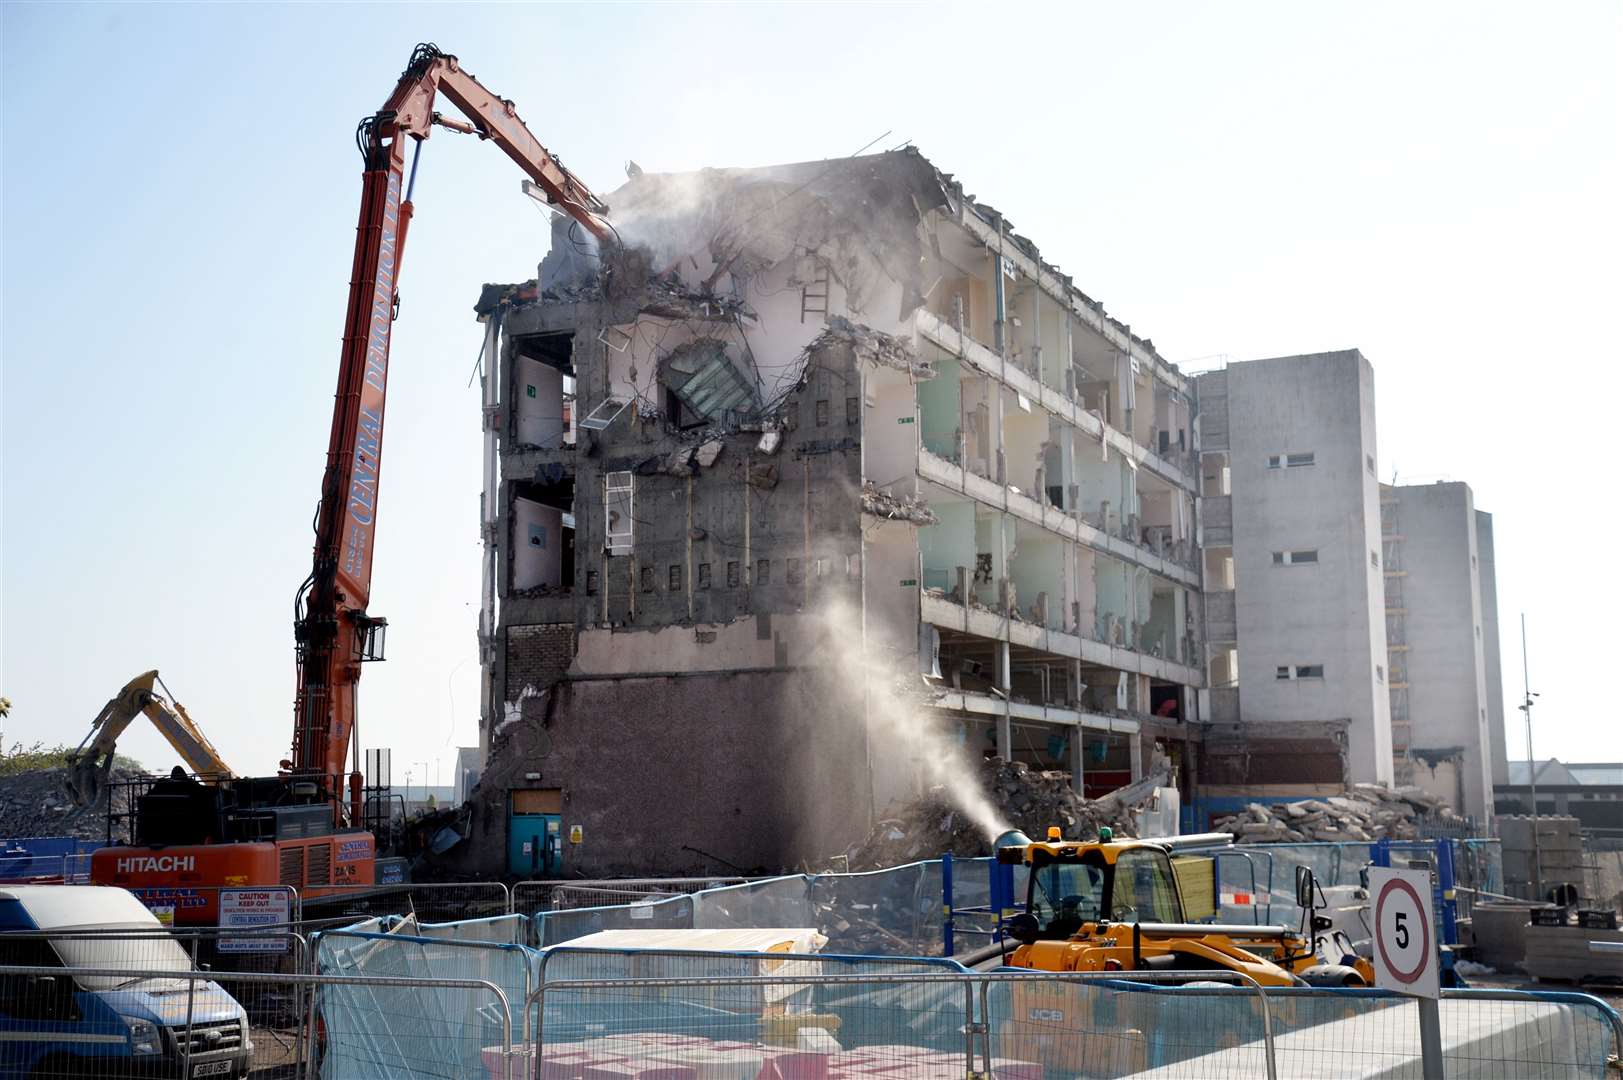 The former Inverness College building was demolished in 2019.